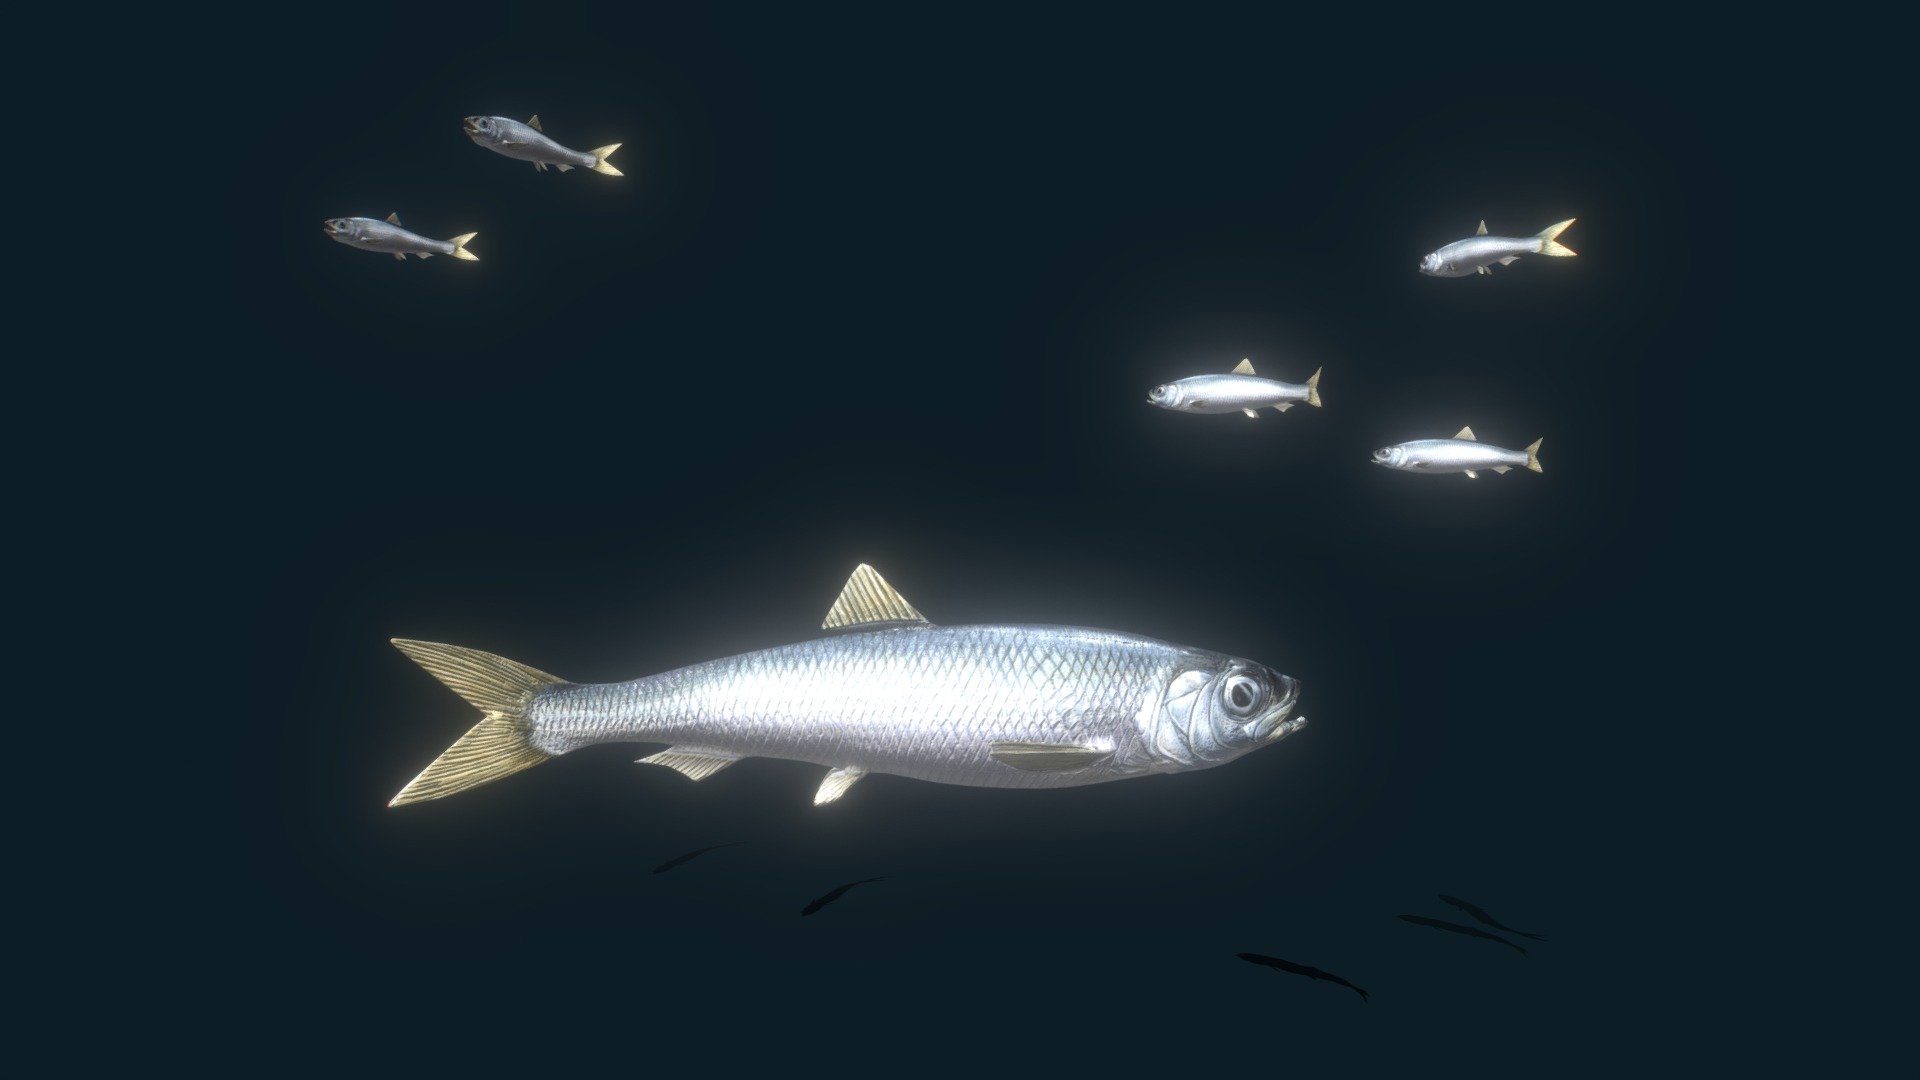 An animated school of atlantic herring. The model and animation is optimized for augmented reality 3d model